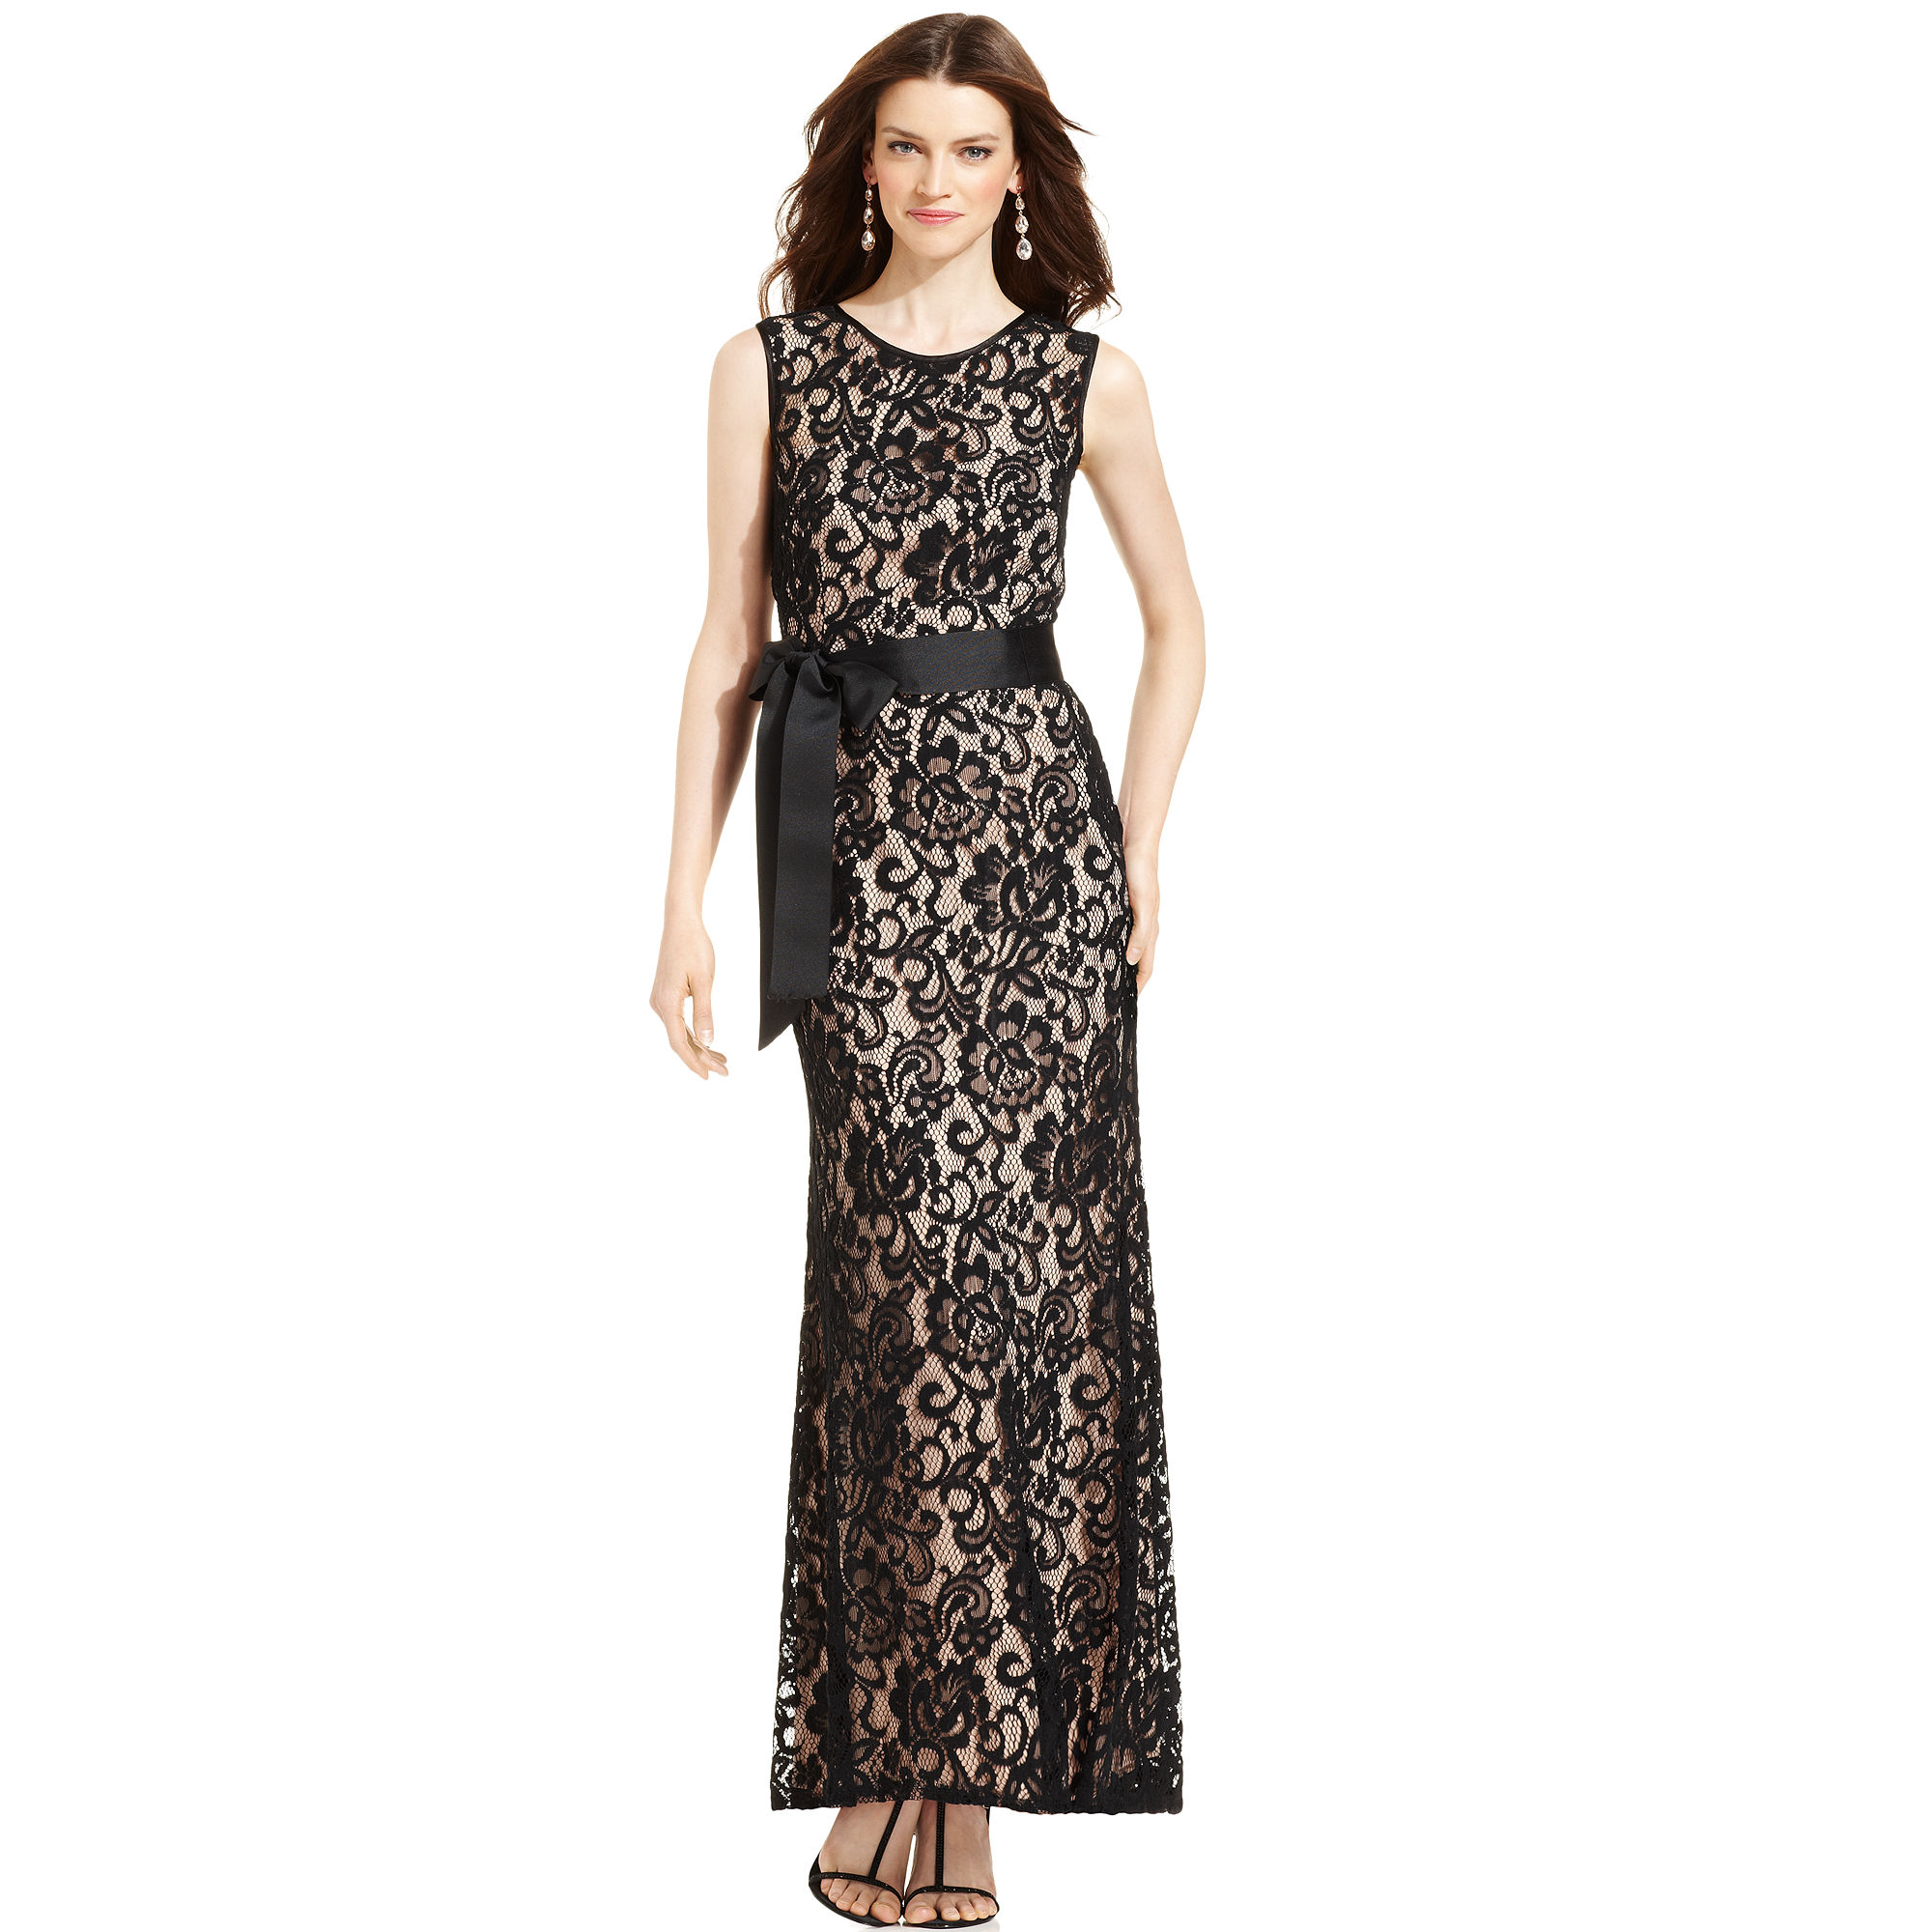 Lyst - Betsy & Adam Betsy and Adam Dress Sleeveless Belted Lace Gown in ...